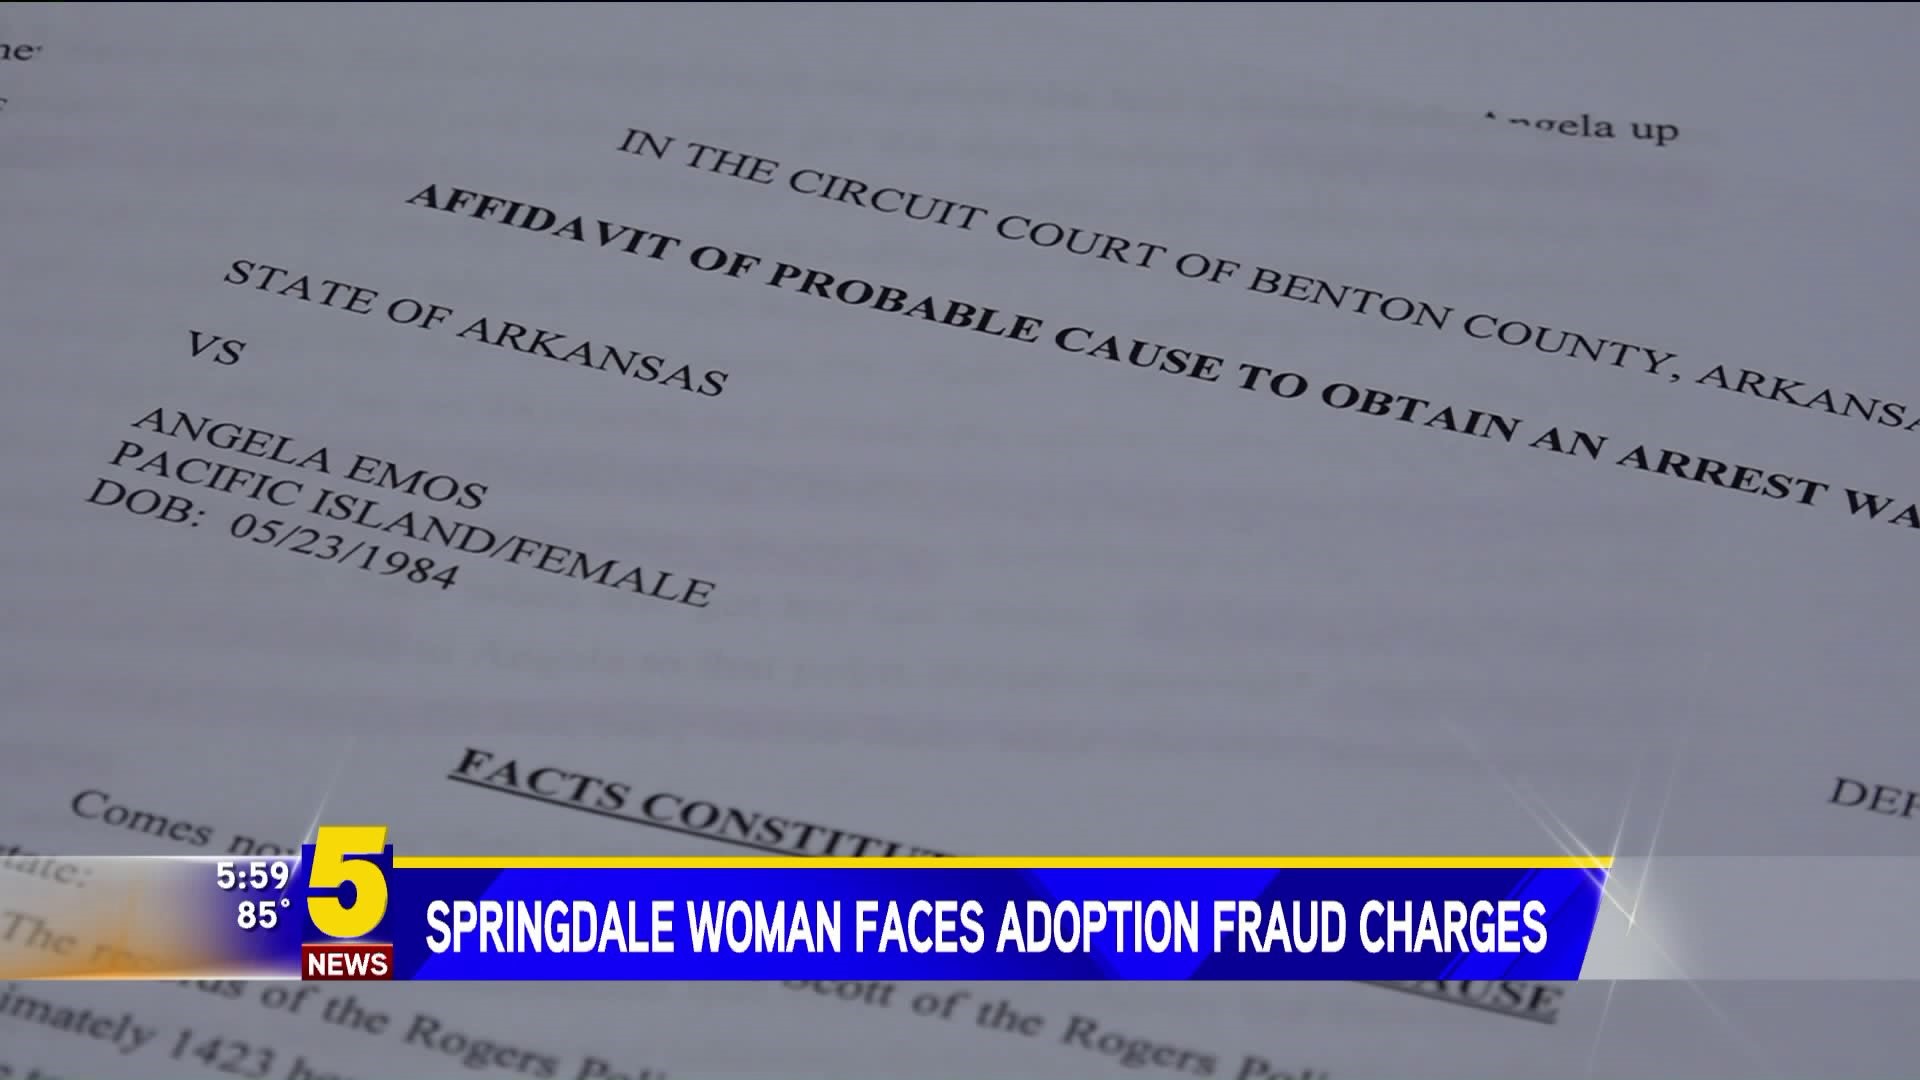 Springdale Woman Faces Adoption Fraud Charges